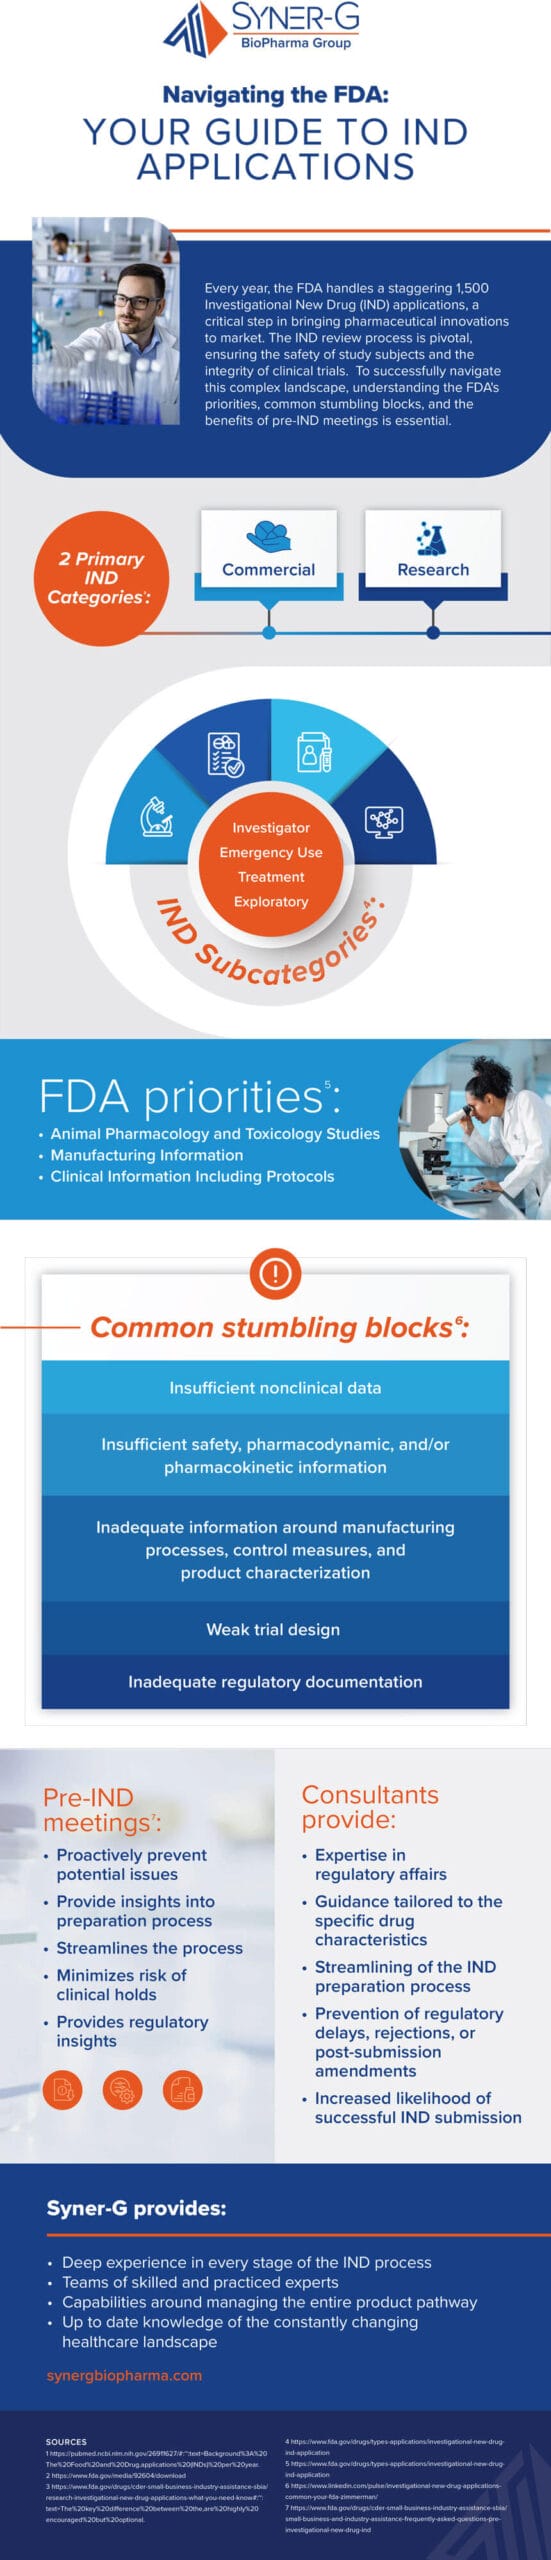 Navigating the FDA: YOUR GUIDE TO IND APPLICATIONS - screenshot